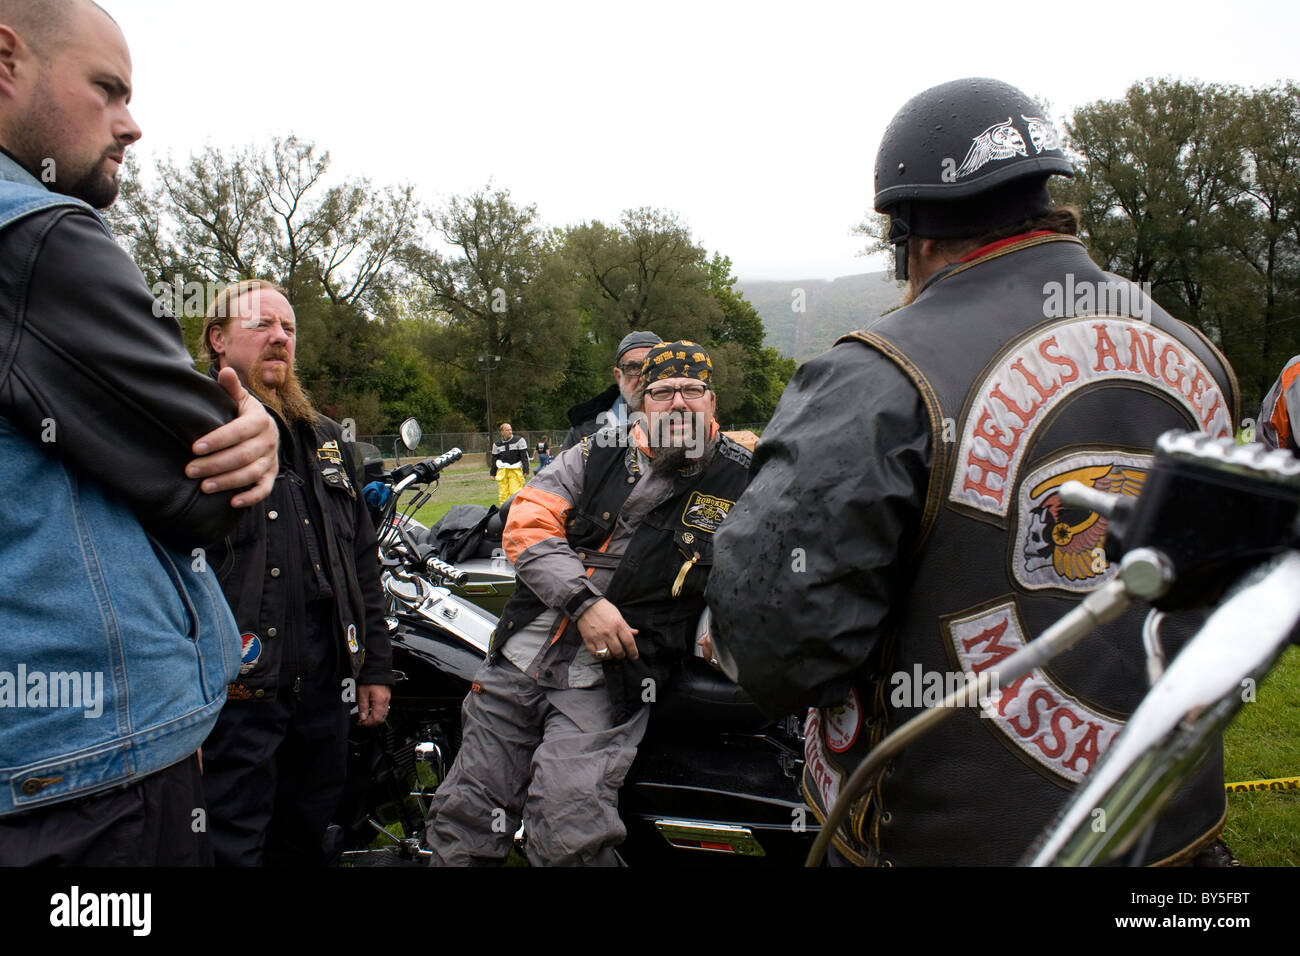 Hells Angels motorcycle riders waits for the start of the annual autumn charity ride in Adams Massachusetts. Stock Photo